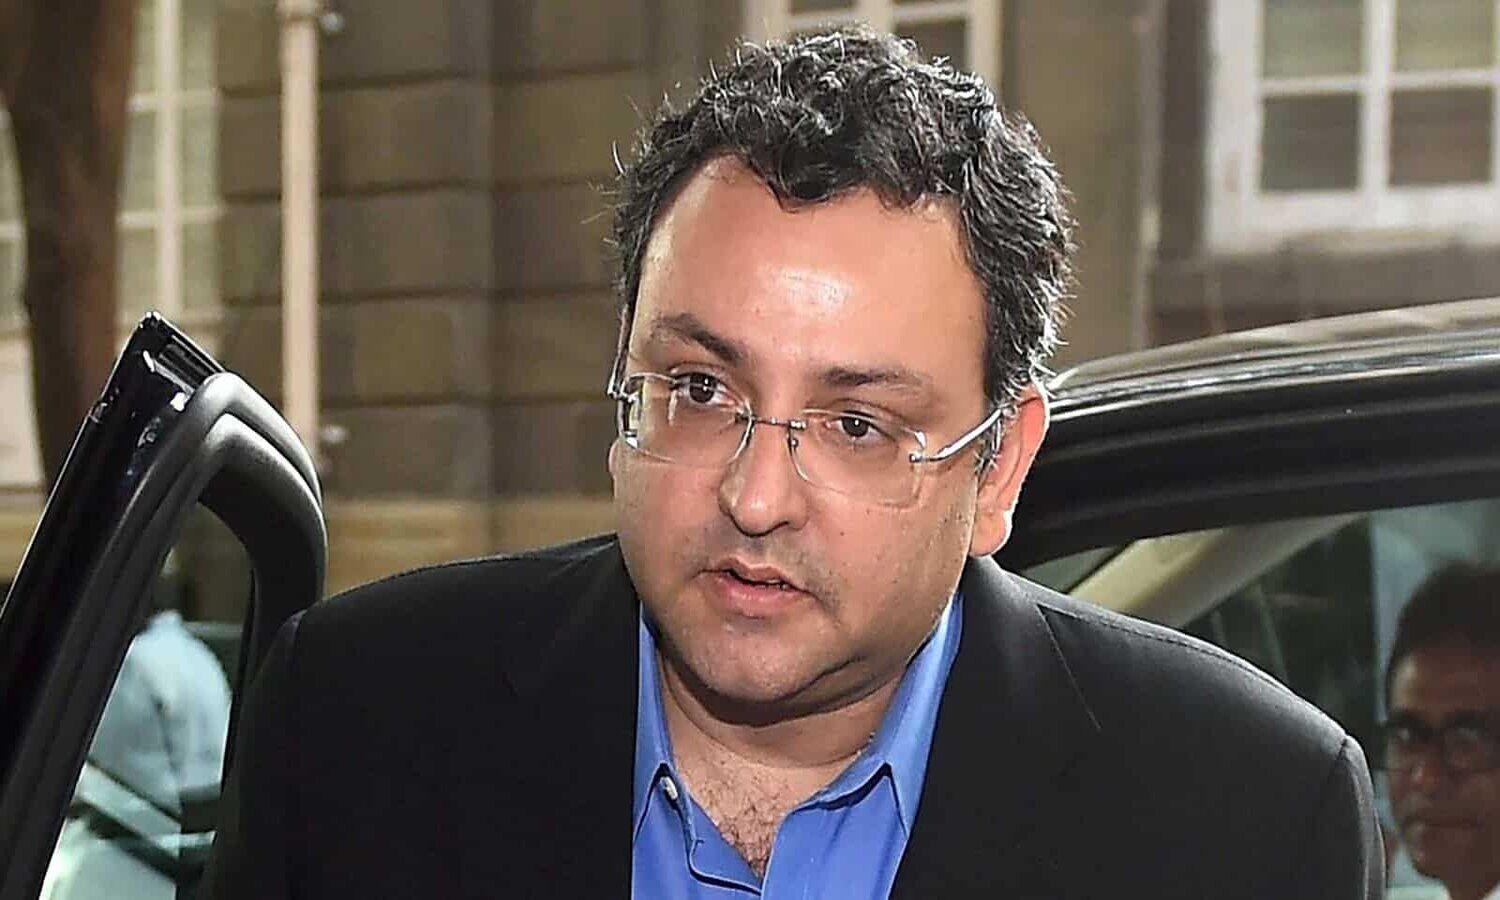 Cyrus Mistry Funeral: The last rites of the former chairman of Tata Group took place today, multitrauma became the cause of death